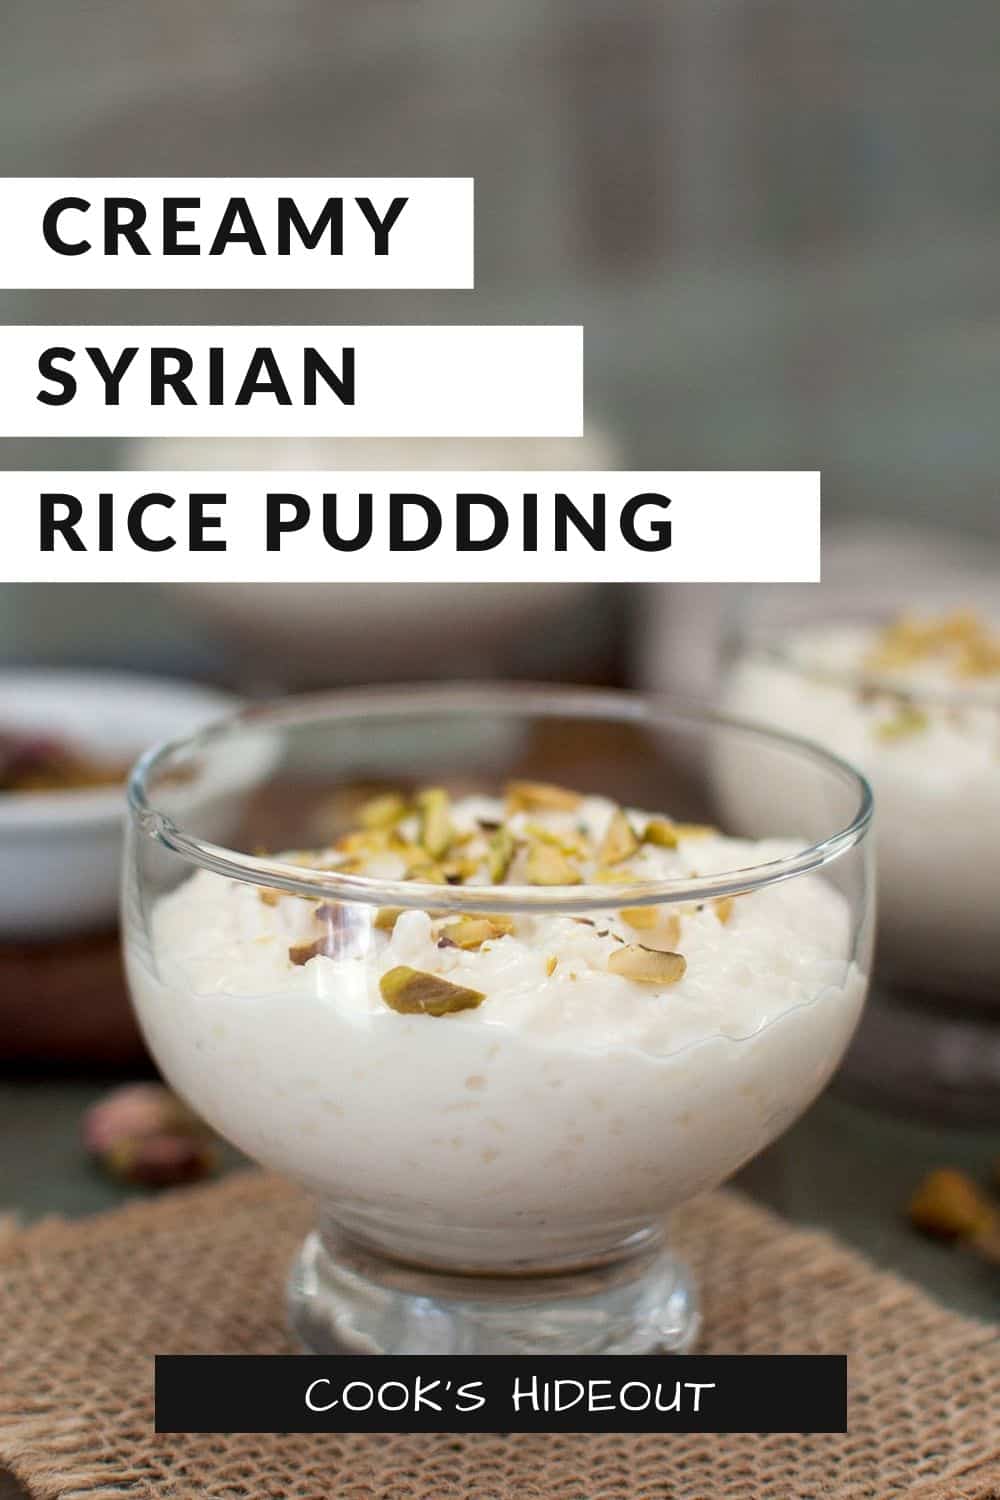 Syrian Rice Pudding served in a glass serving jar